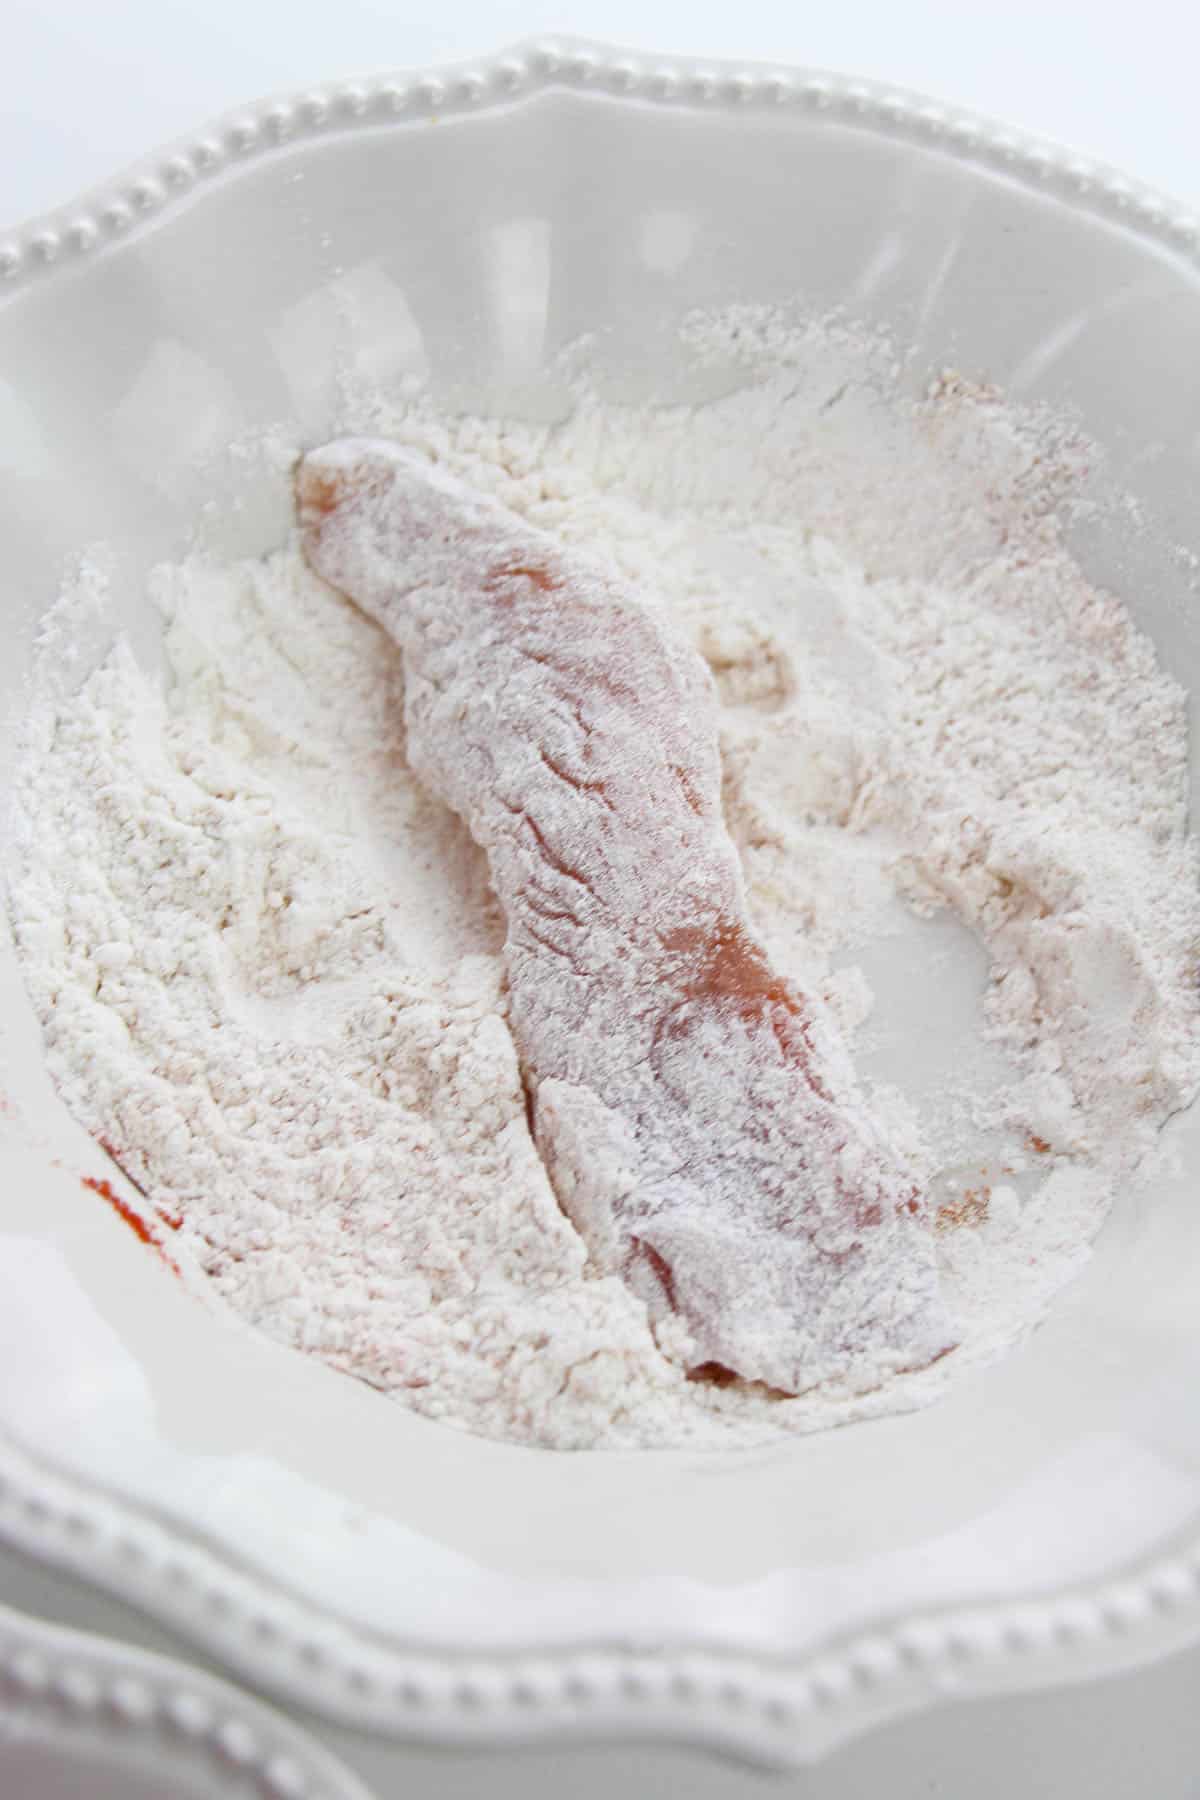 Flour mixture with a raw chicken finger